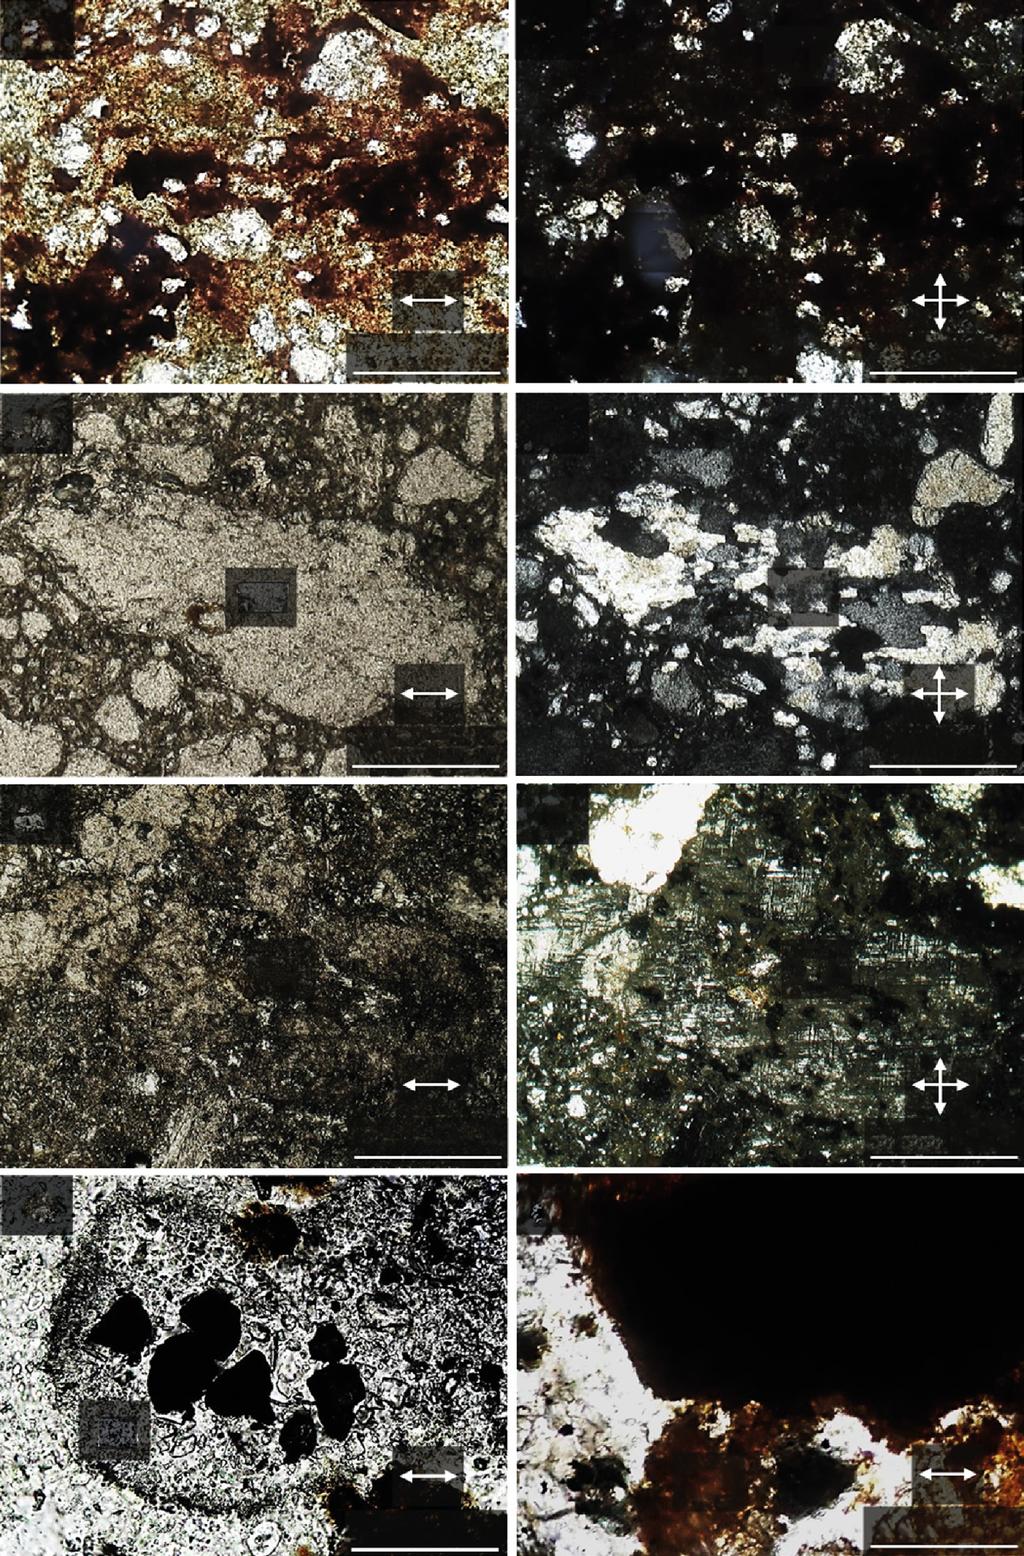 Brilhante et al. Weathering of rhyolites and soil formation in an Atlantic Forest... (a) (b) Q Q Q 1 mm (c) 1 mm (d) Q R.F. R.F. 250 µm (e) 250 µm (f) Fd Fd 125 µm (g) 125 µm (h) Hm Hm 500 µm 500 µm Figure 3.